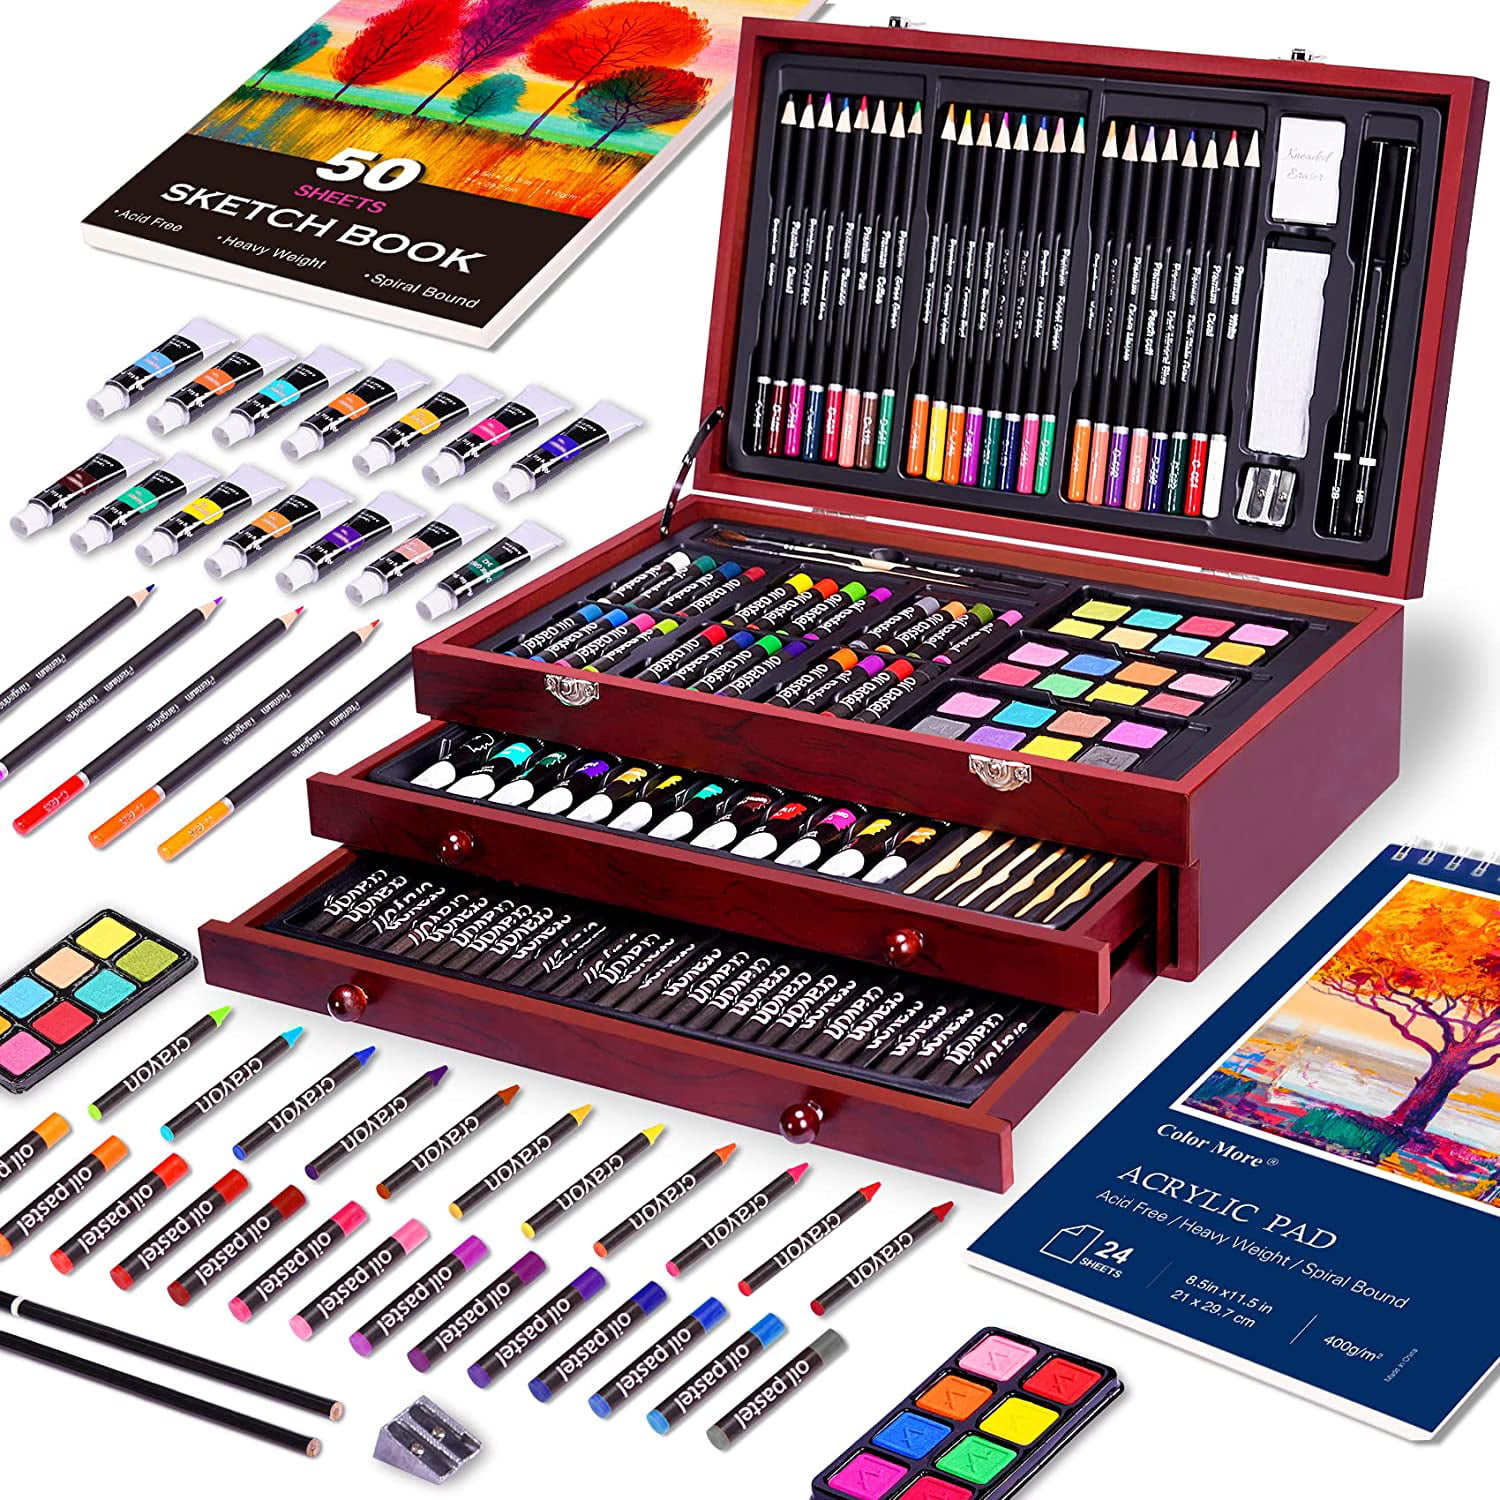 COOL BANK 175 Piece Deluxe Art Supplies, Art Set with 2 A4 Drawing Pads, 24  Acrylic Paints, Crayons, Colored Pencils, Art Kit for Adults Artist